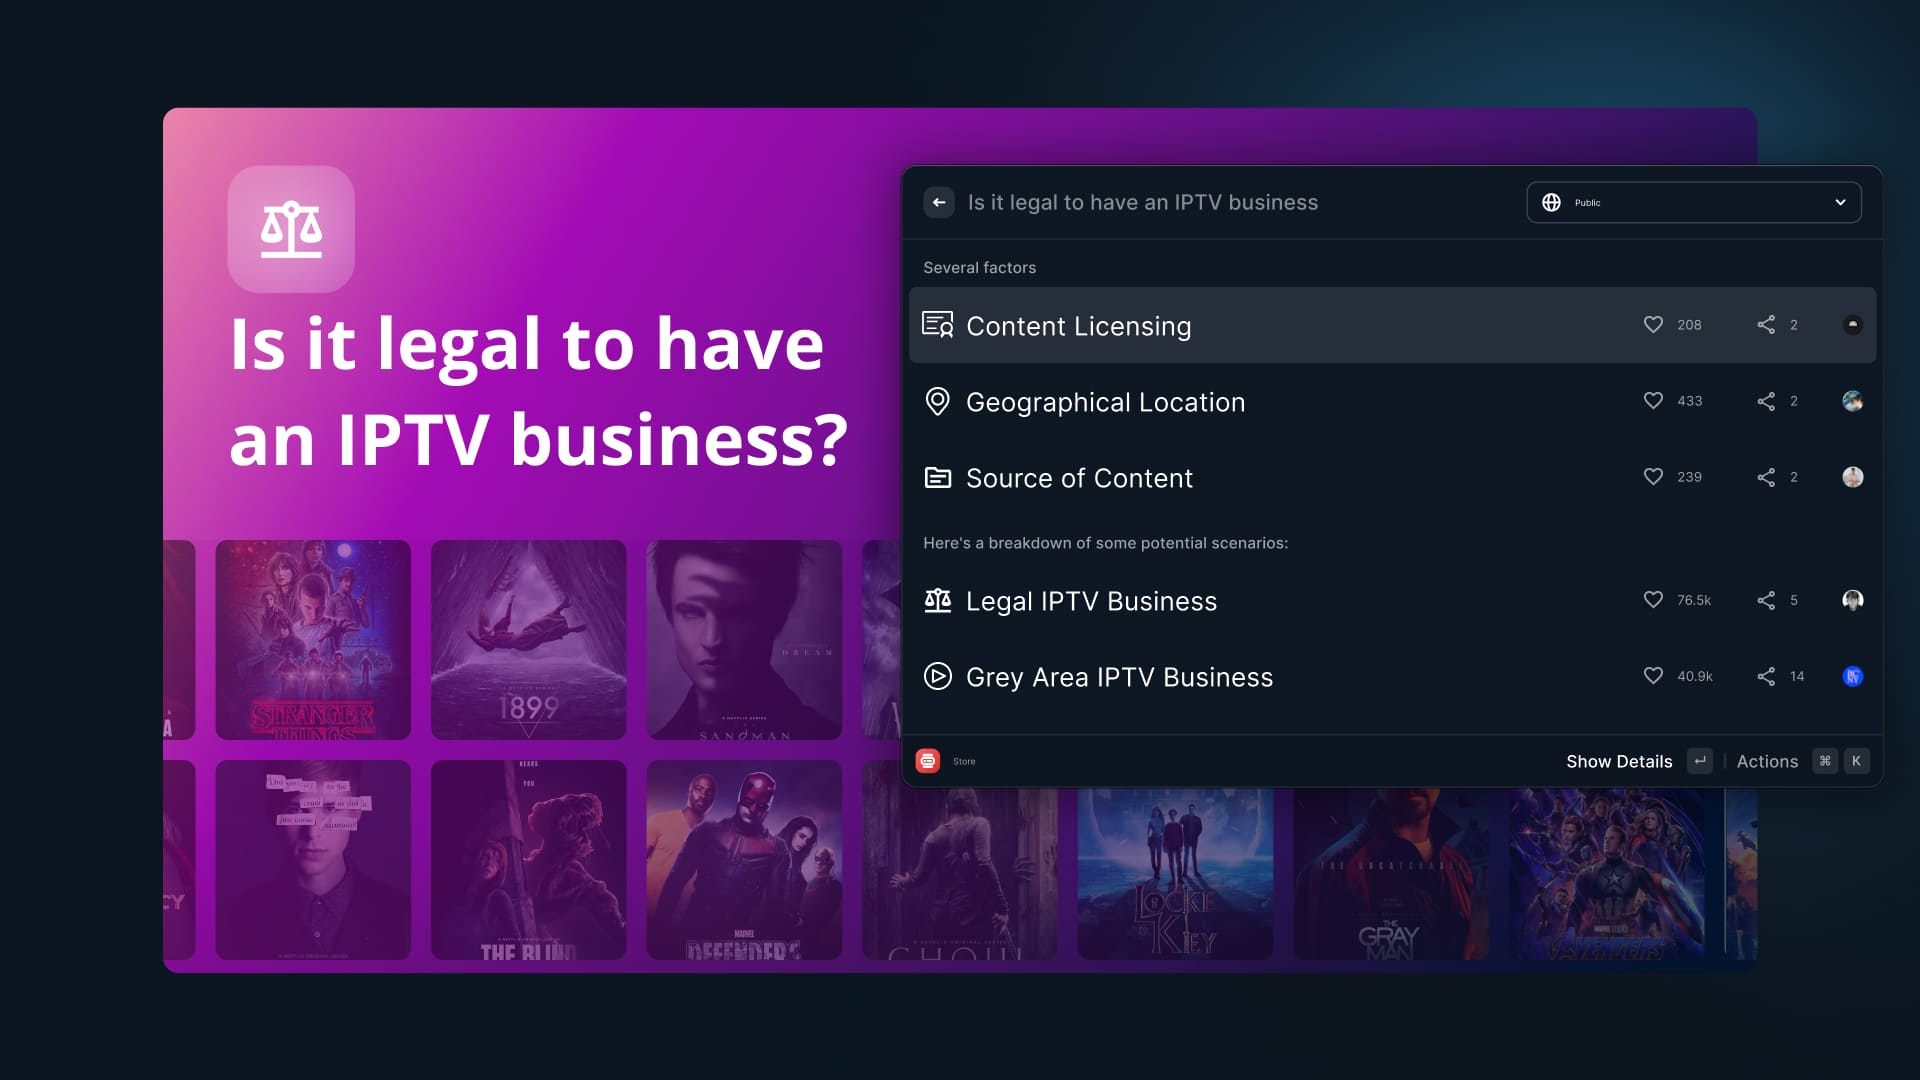 Is it legal to have an IPTV business?